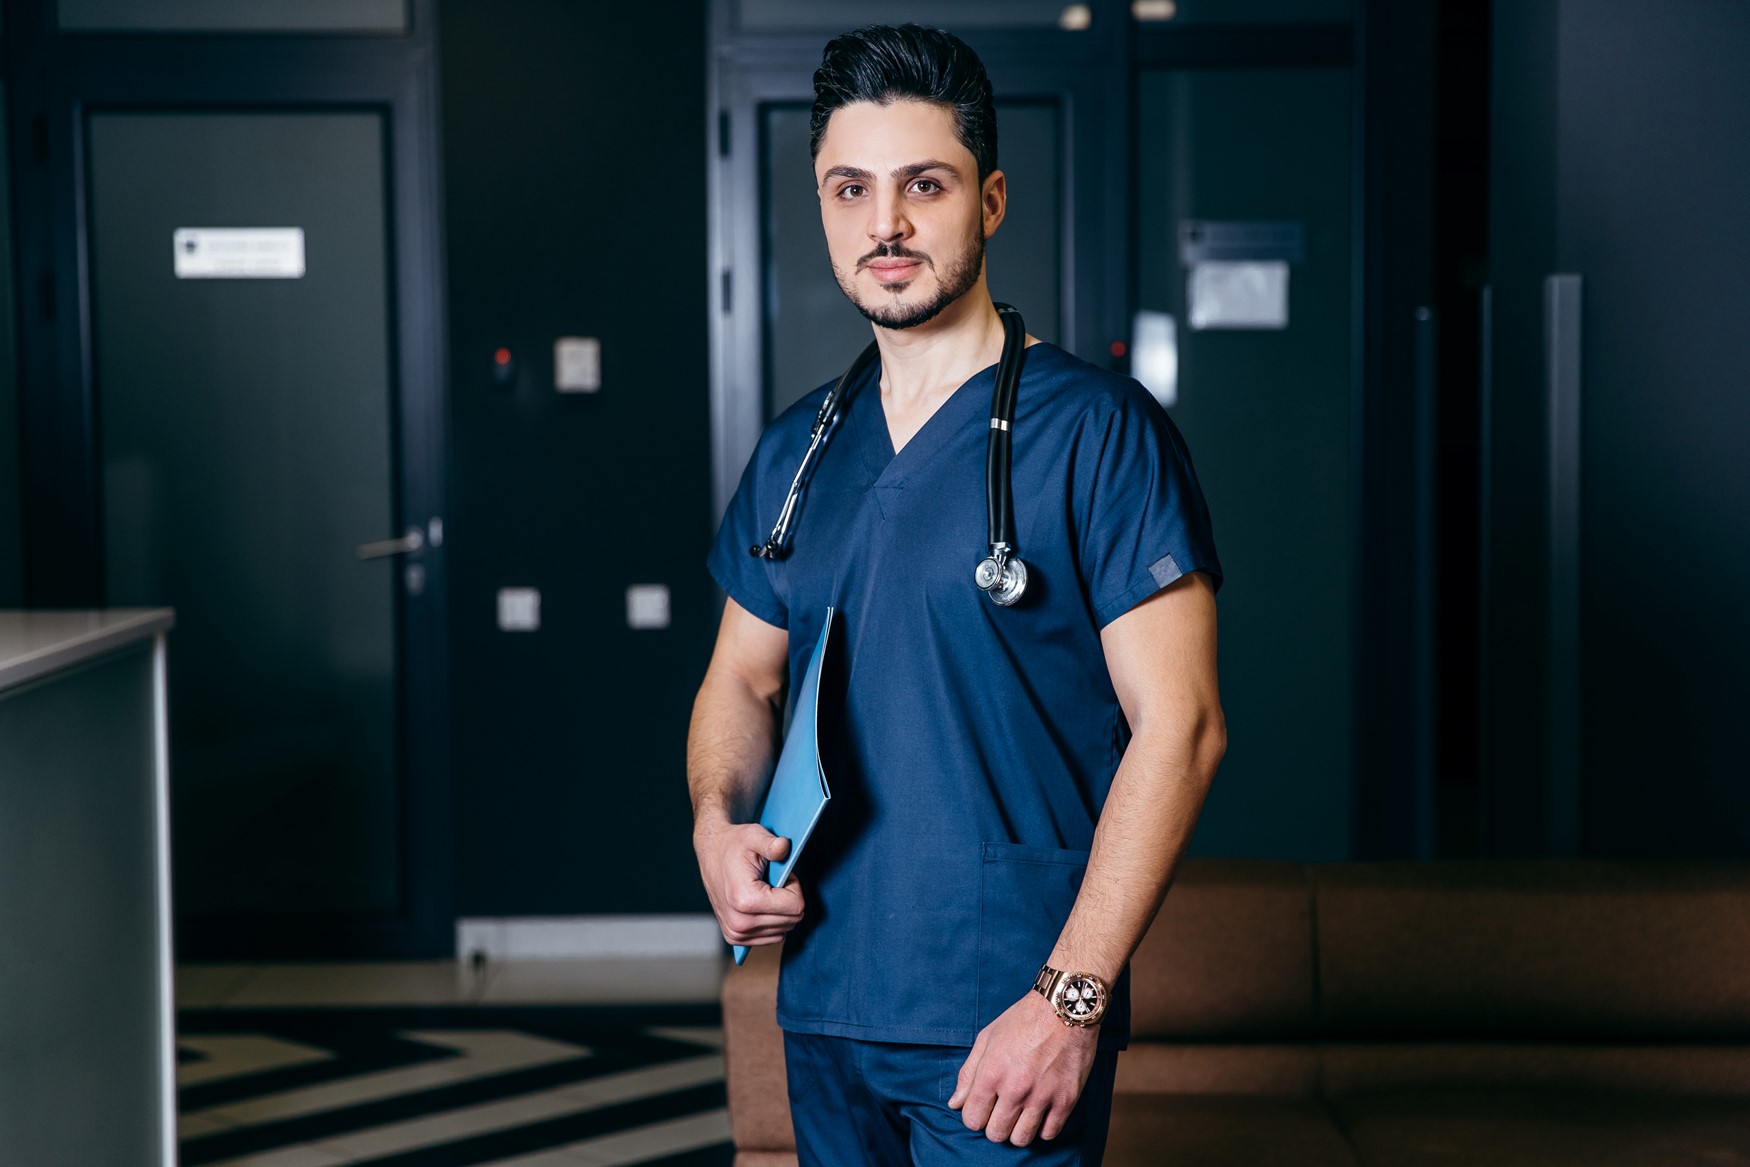 Style and Fashion Tips for a Male Nurse in Scrubs